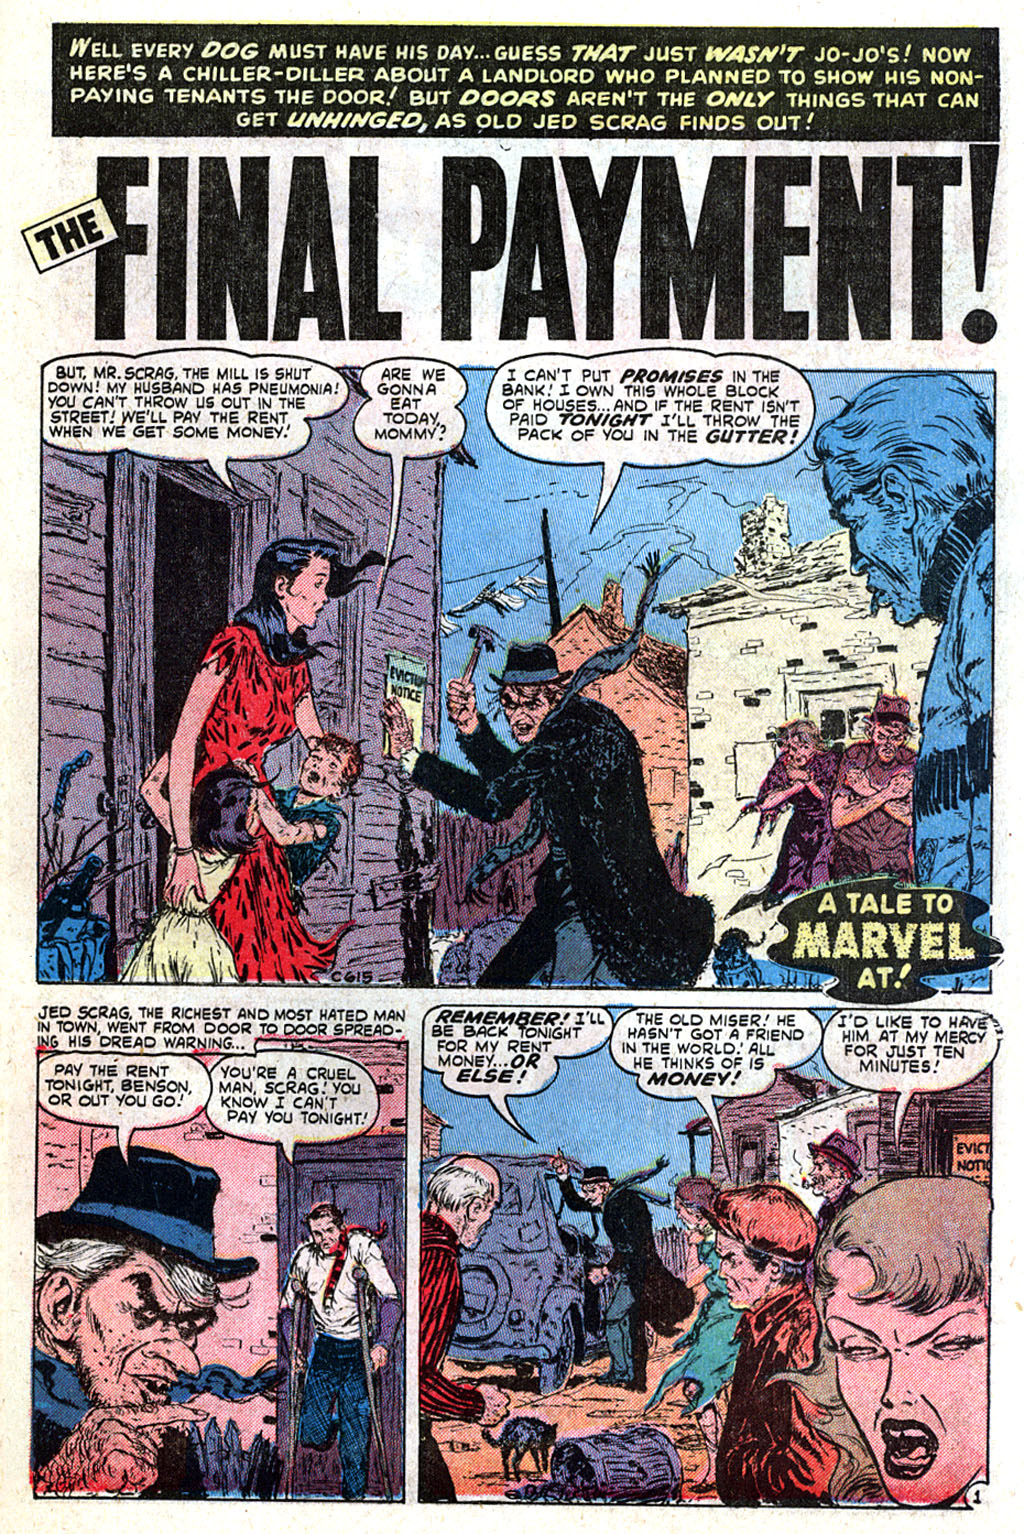 Marvel Tales (1949) 116 Page 21